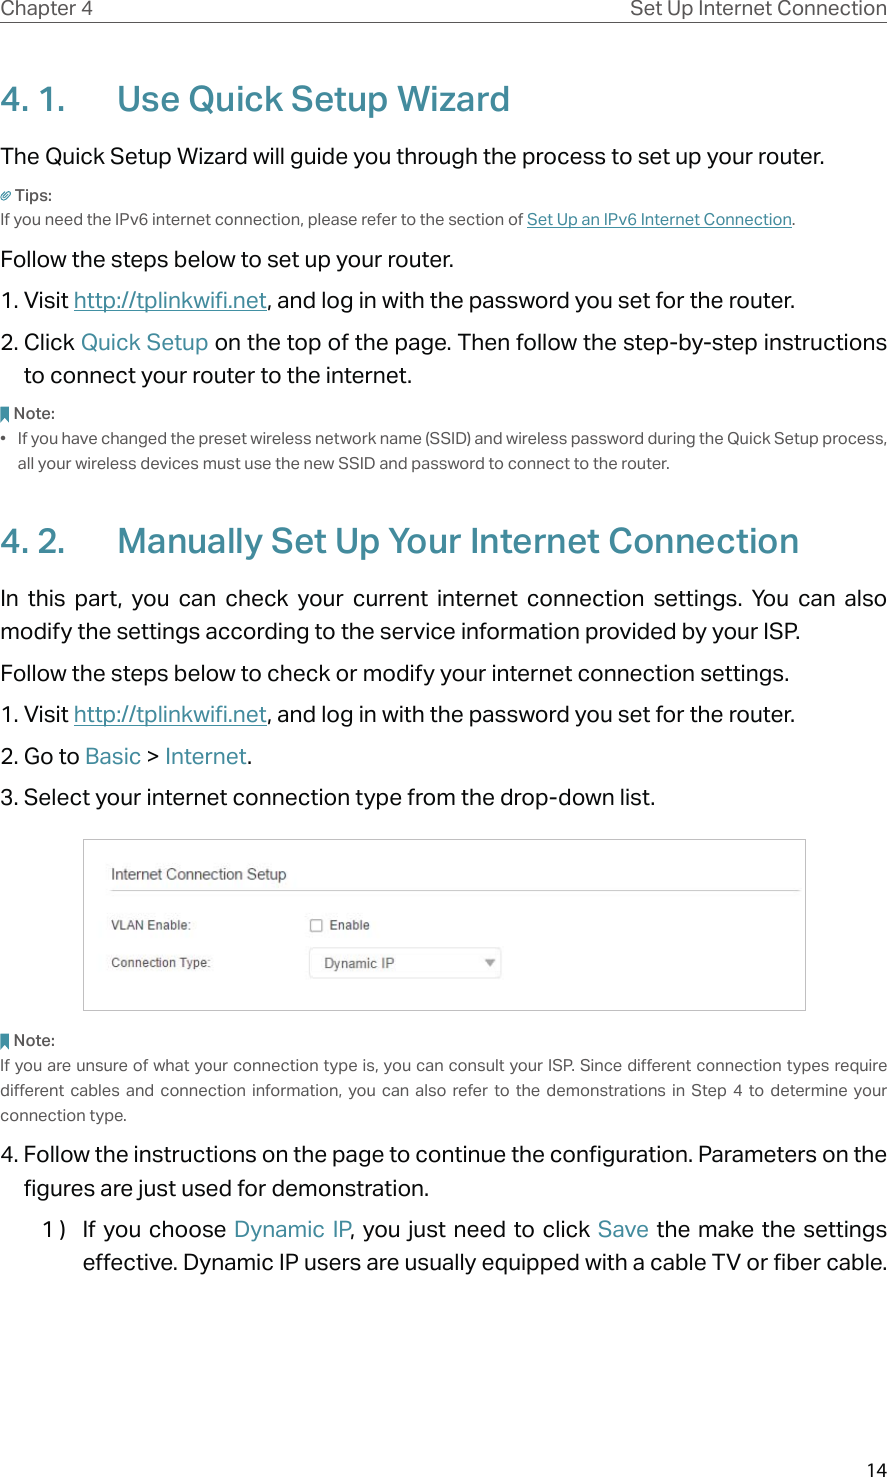 14Chapter 4 Set Up Internet Connection4. 1.  Use Quick Setup WizardThe Quick Setup Wizard will guide you through the process to set up your router.Tips:If you need the IPv6 internet connection, please refer to the section of Set Up an IPv6 Internet Connection.Follow the steps below to set up your router.1. Visit http://tplinkwifi.net, and log in with the password you set for the router.2. Click Quick Setup on the top of the page. Then follow the step-by-step instructions to connect your router to the internet.Note:•  If you have changed the preset wireless network name (SSID) and wireless password during the Quick Setup process, all your wireless devices must use the new SSID and password to connect to the router.4. 2.  Manually Set Up Your Internet Connection In this part, you can check your current internet connection settings. You can also modify the settings according to the service information provided by your ISP.Follow the steps below to check or modify your internet connection settings.1. Visit http://tplinkwifi.net, and log in with the password you set for the router.2. Go to Basic &gt; Internet.3. Select your internet connection type from the drop-down list. Note:If you are unsure of what your connection type is, you can consult your ISP. Since different connection types require different cables and connection information, you can also refer to the demonstrations in Step 4 to determine your connection type.4. Follow the instructions on the page to continue the configuration. Parameters on the figures are just used for demonstration. 1 )  If you choose Dynamic IP, you just need to click Save the make the settings effective. Dynamic IP users are usually equipped with a cable TV or fiber cable.